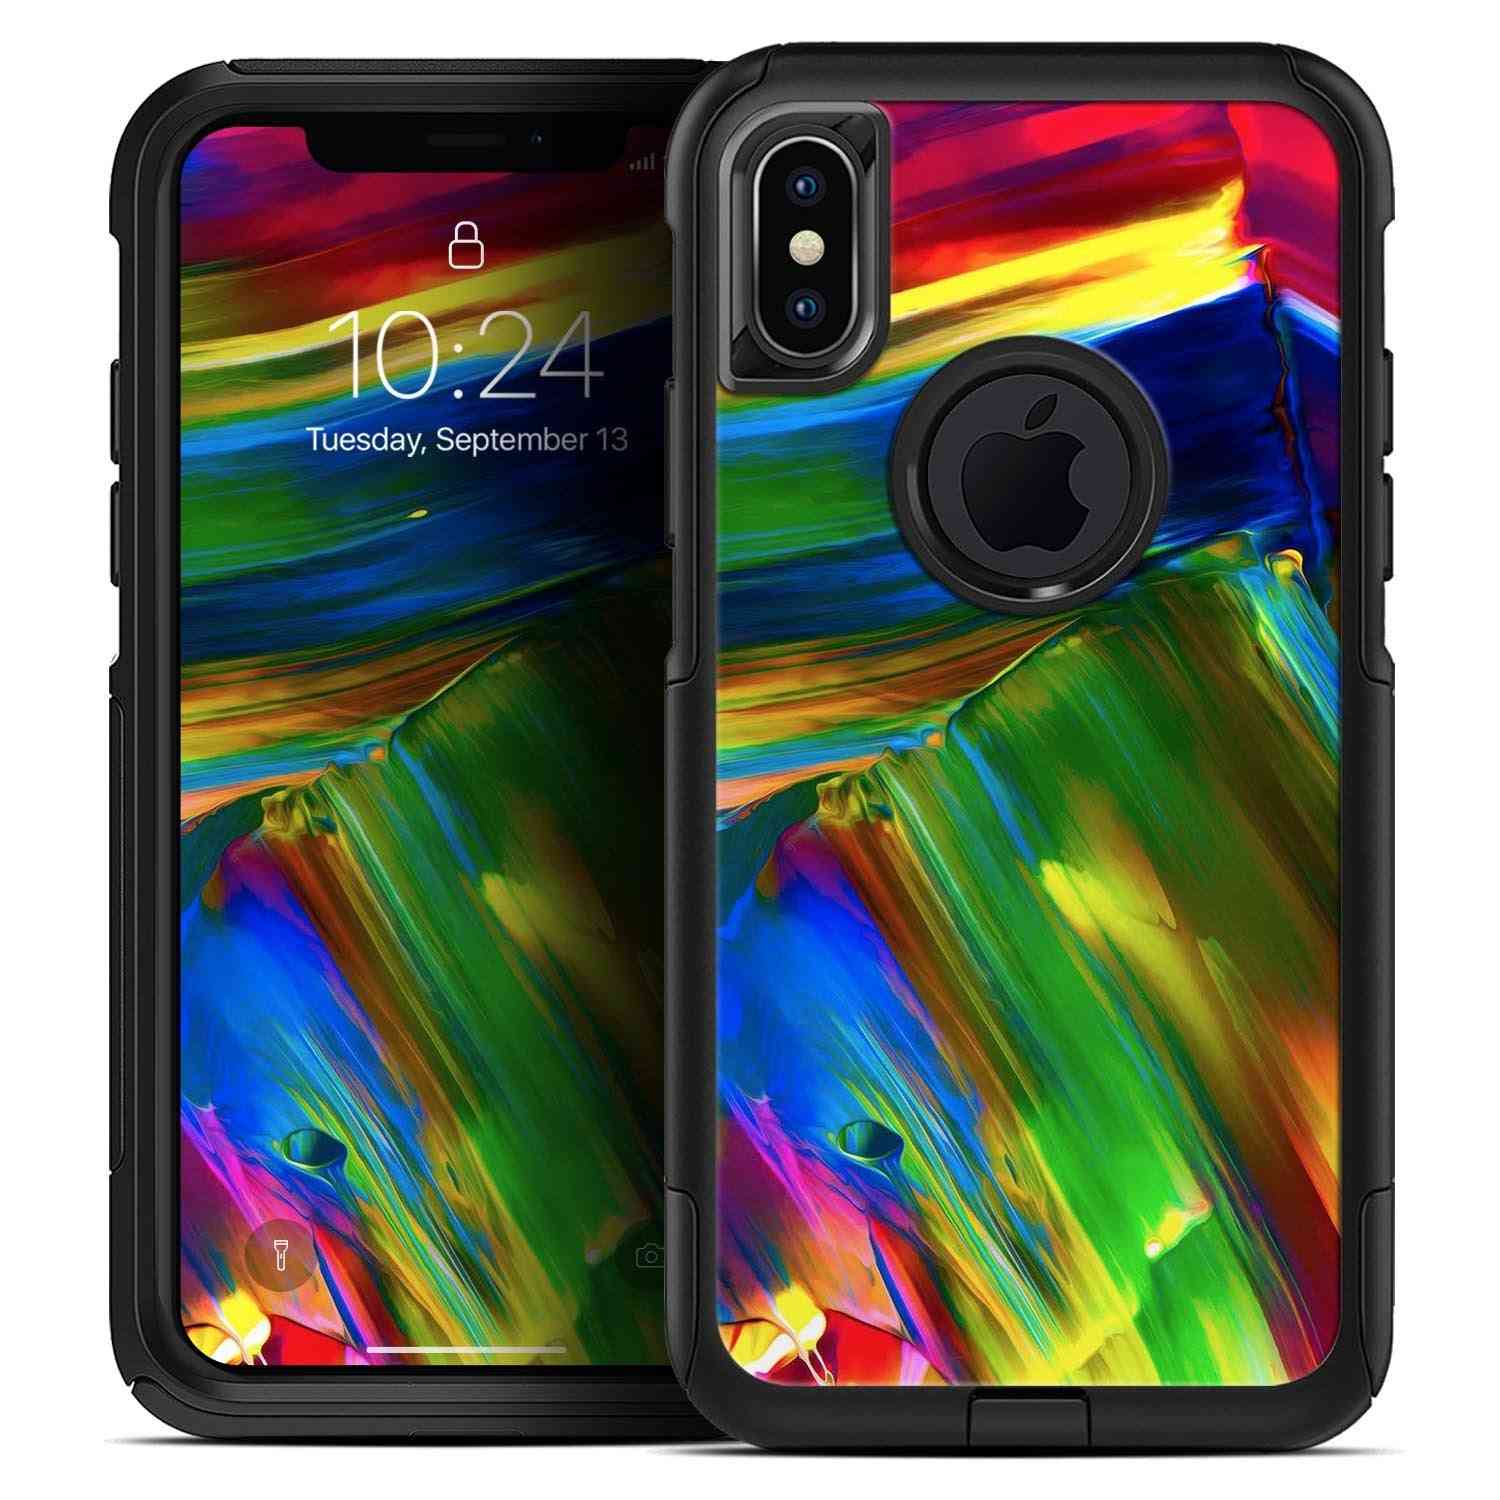 Blurred Abstract Flow V29 - Skin Kit For The Iphone Otterbox Cases